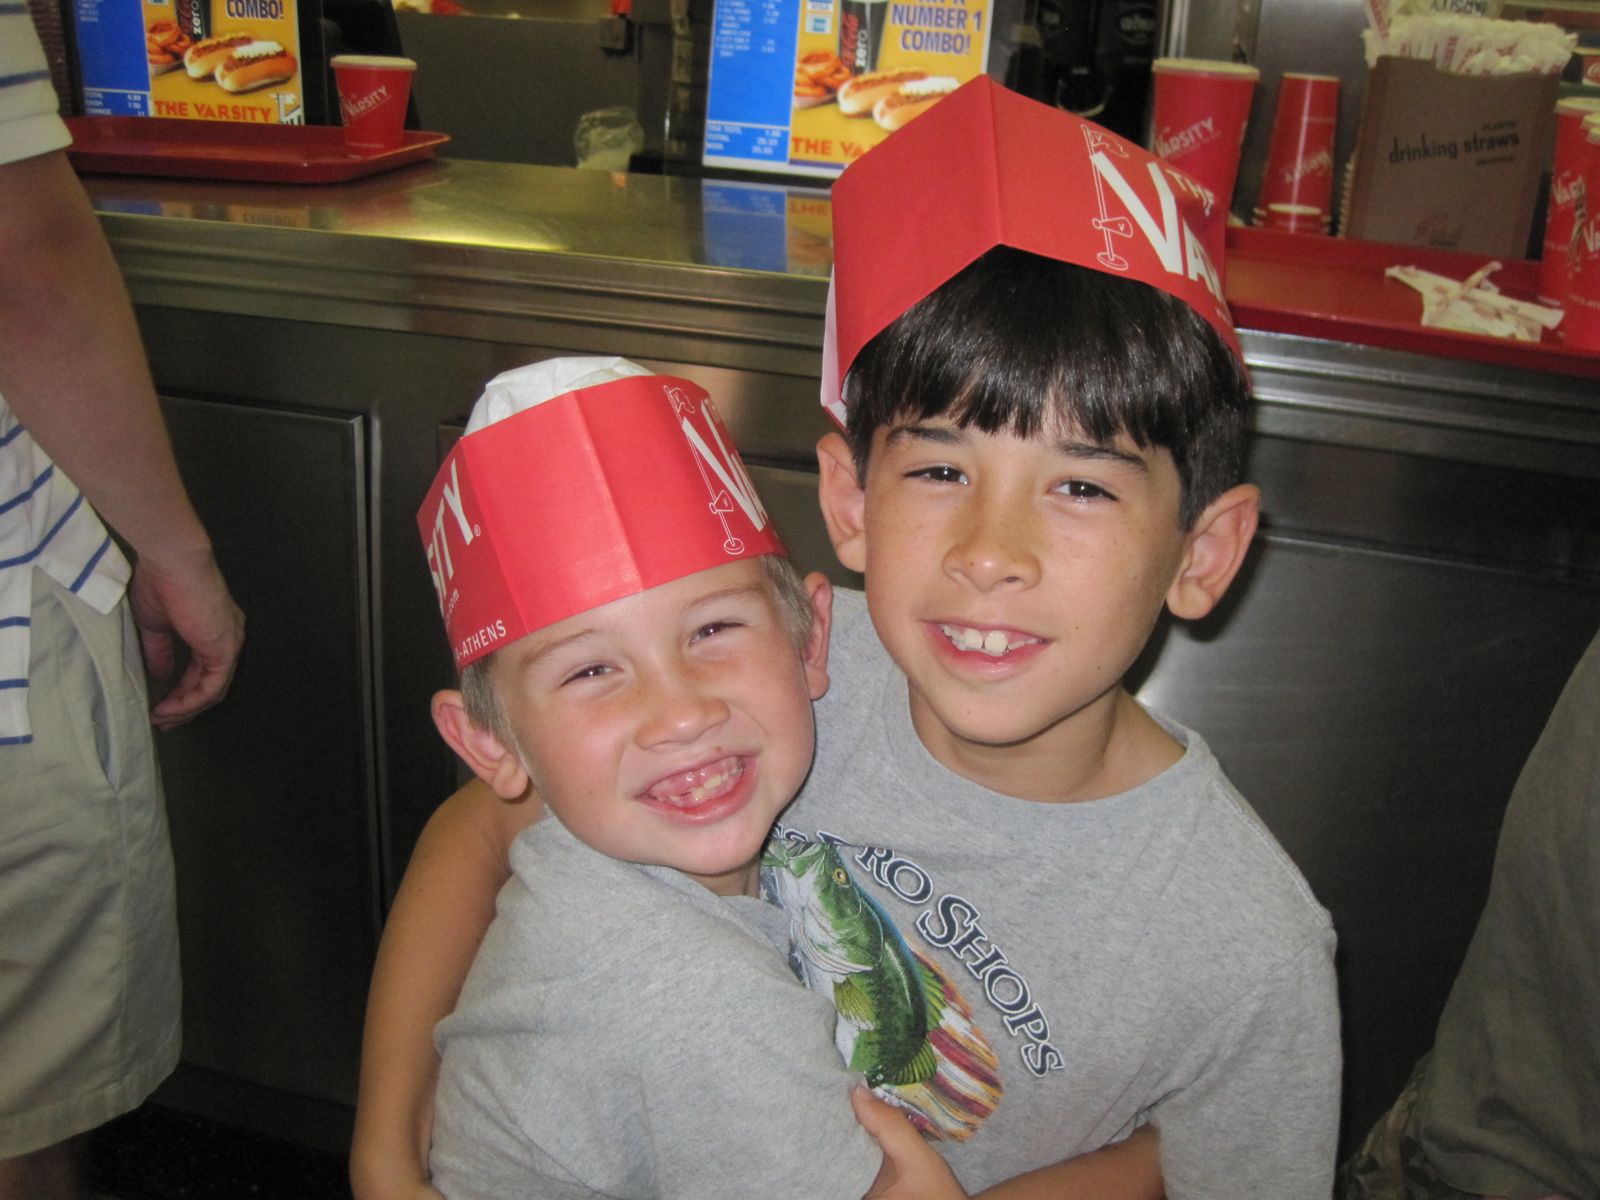 The paper hats are available to anyone. The kids enjoyed wearing them ...